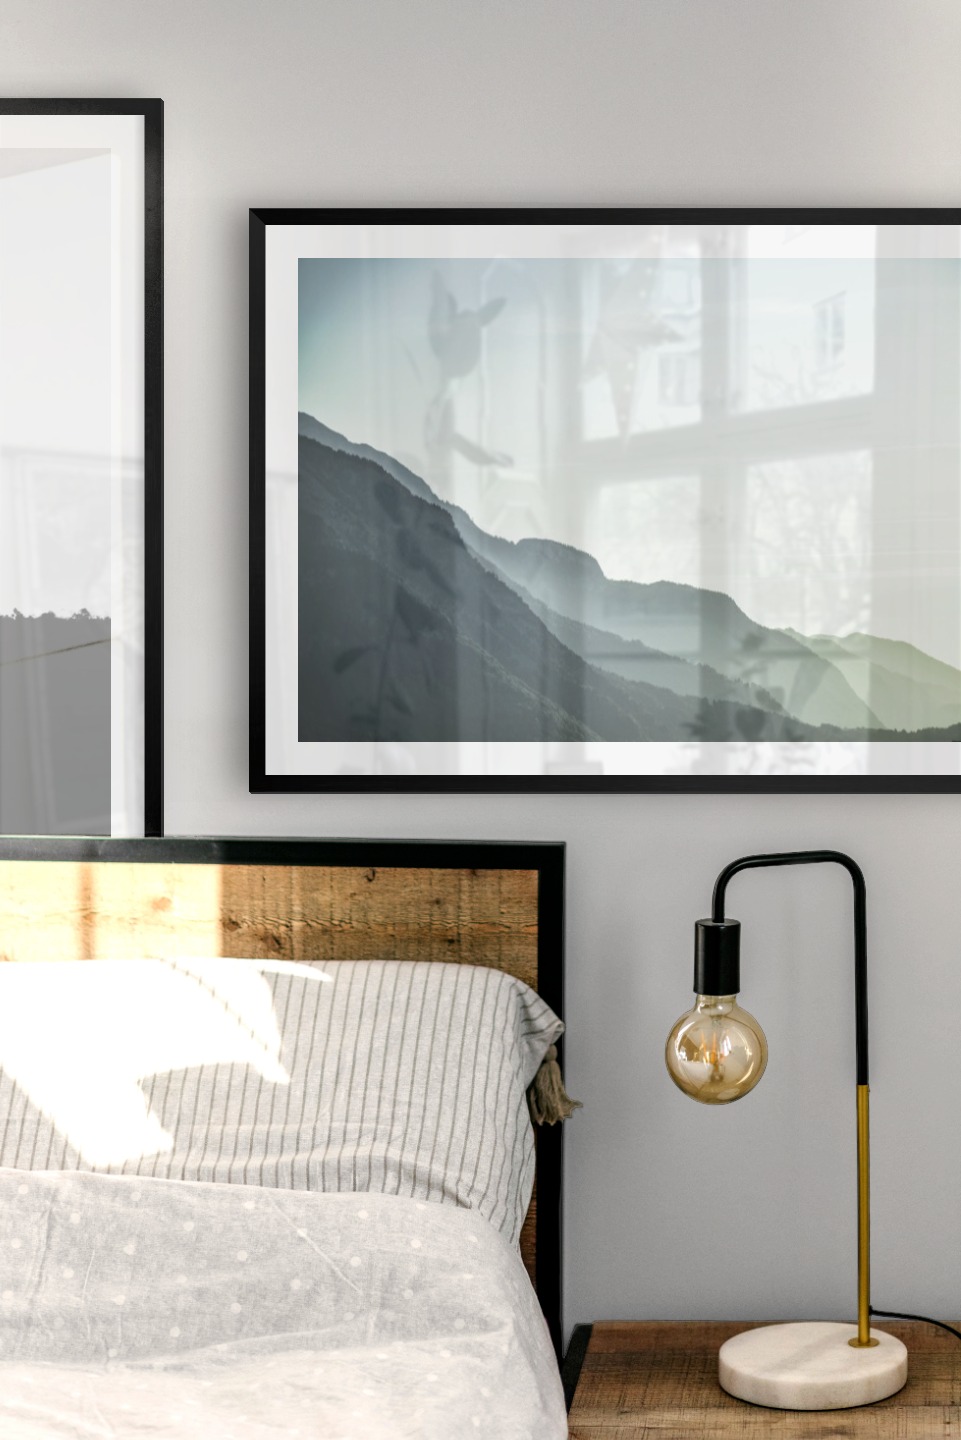 Gallery wall with picture frames in black in sizes 50x70 with prints "Sky above trees" and "Foggy mountain"